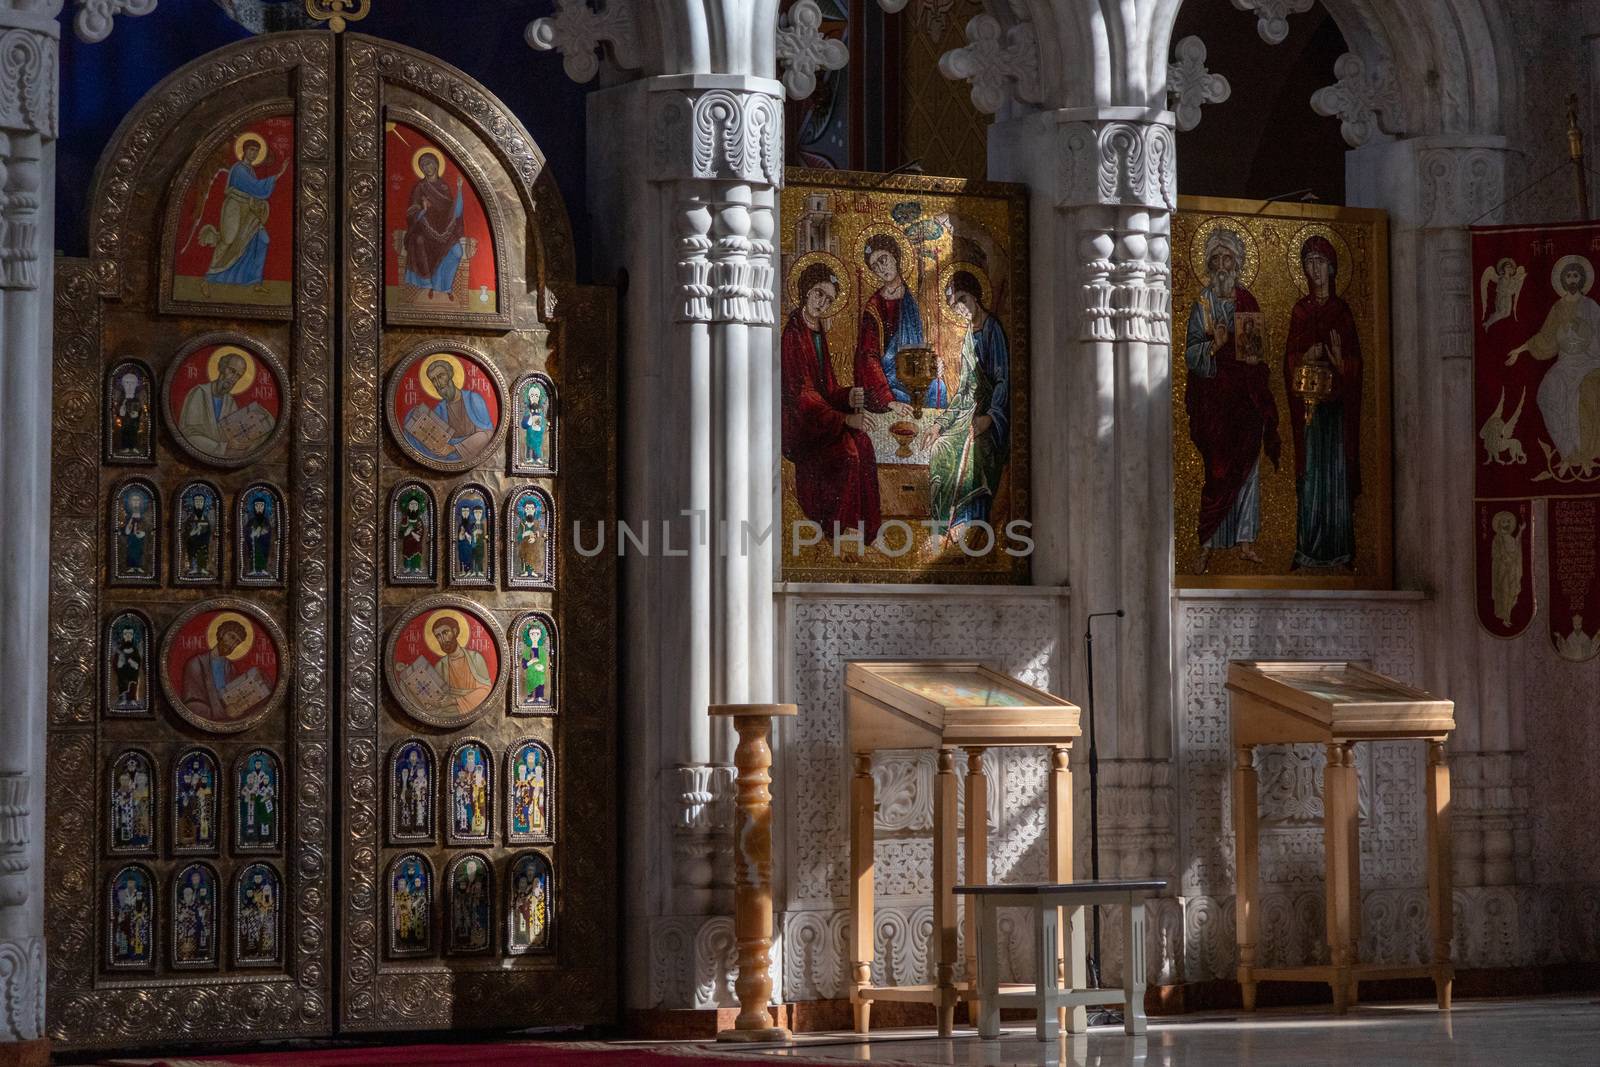 Holy Trinity Cathedral of Tbilisi, Georgia Interior 9/10/2019 by kgboxford